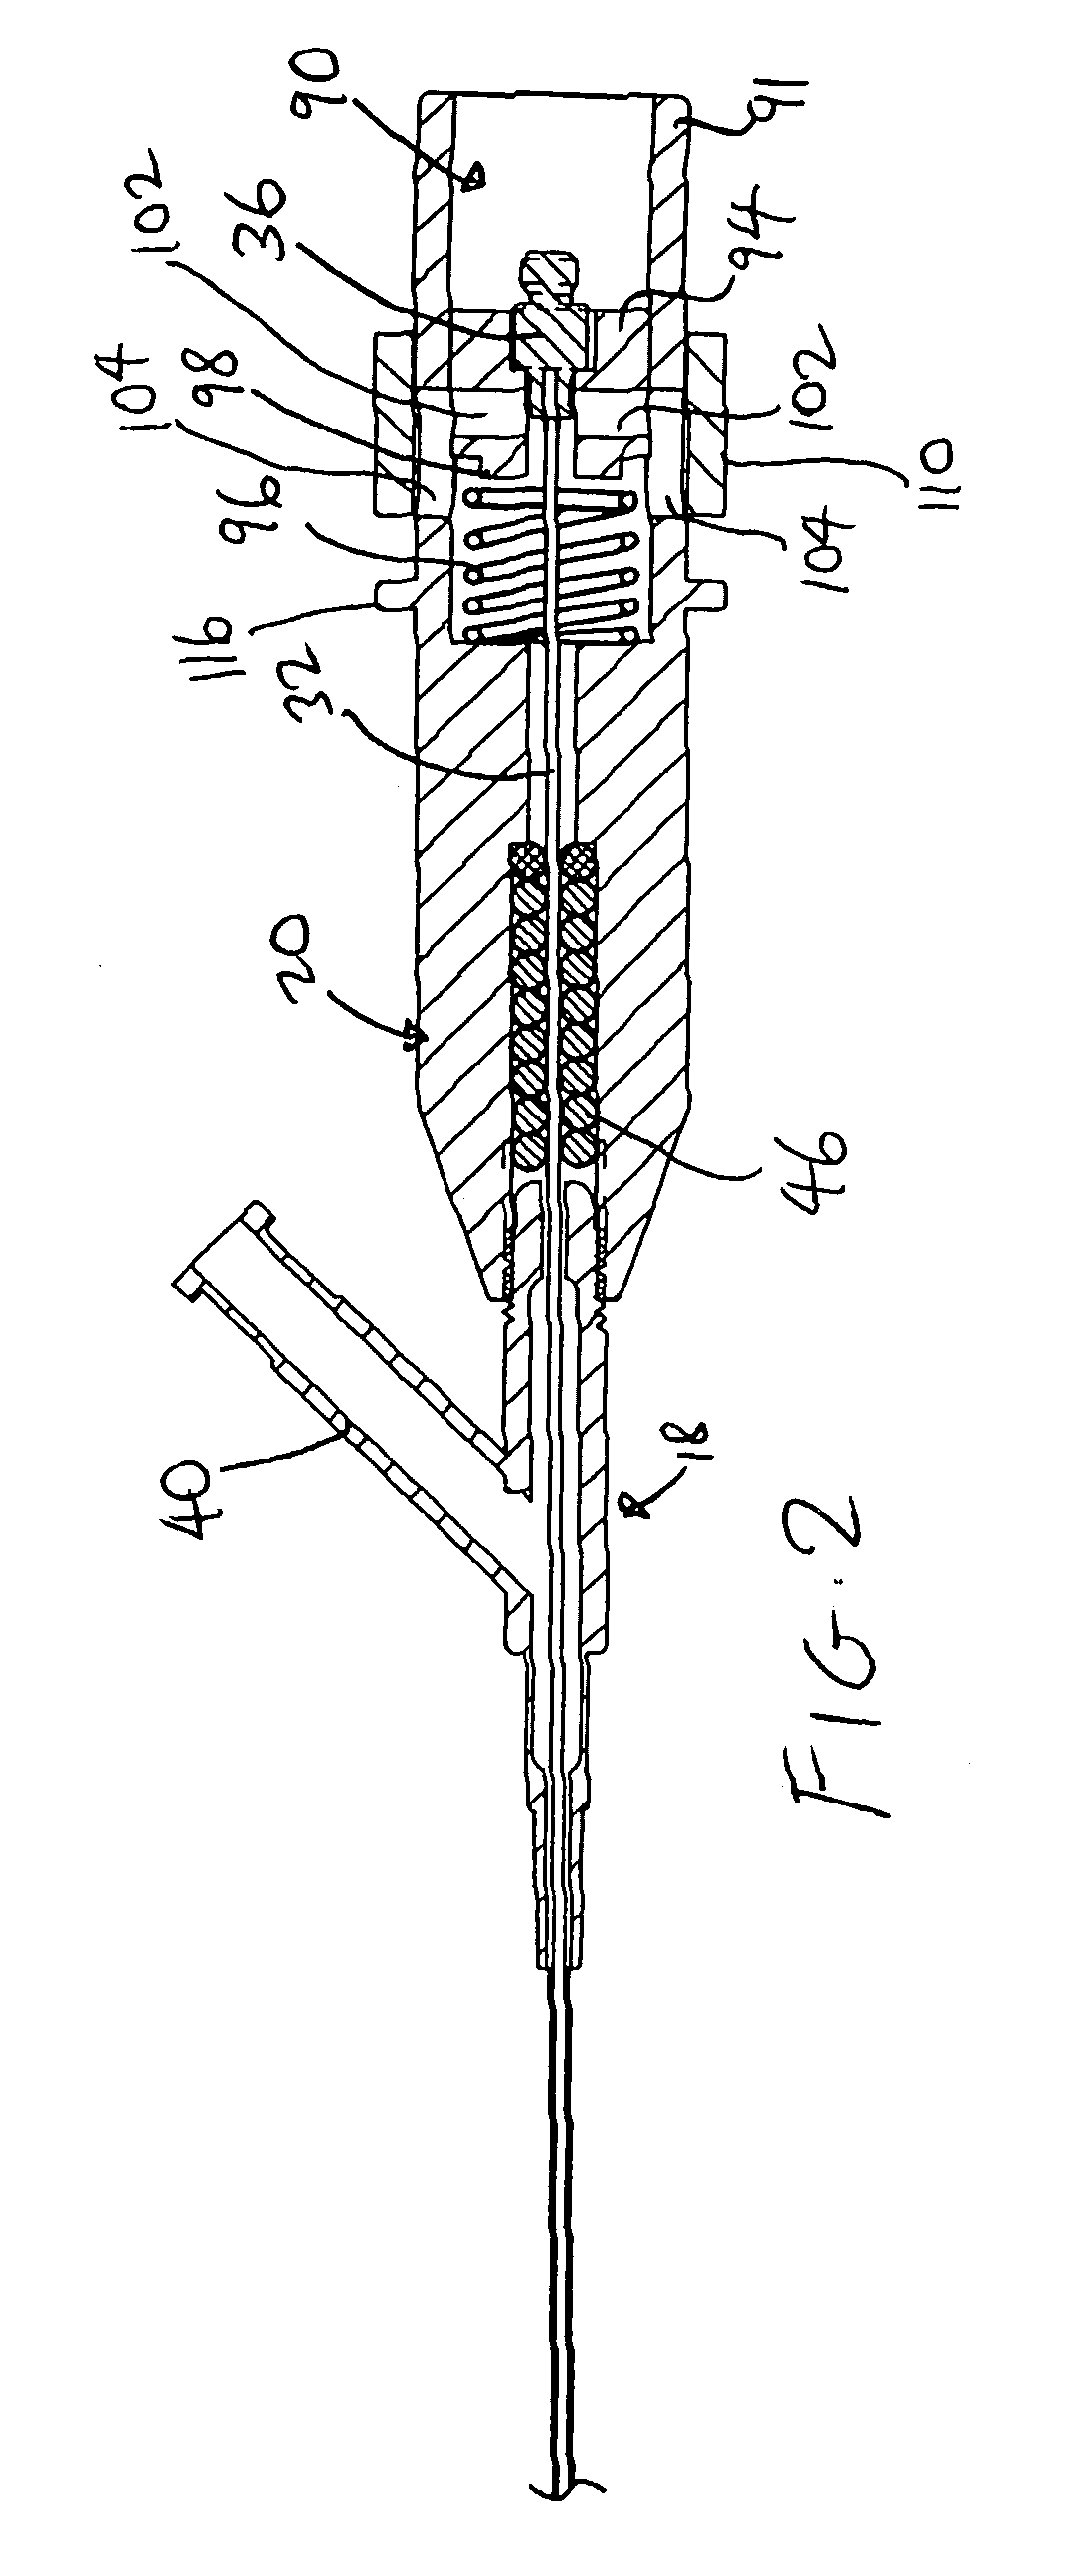 Connector for securing ultrasound catheter to transducer